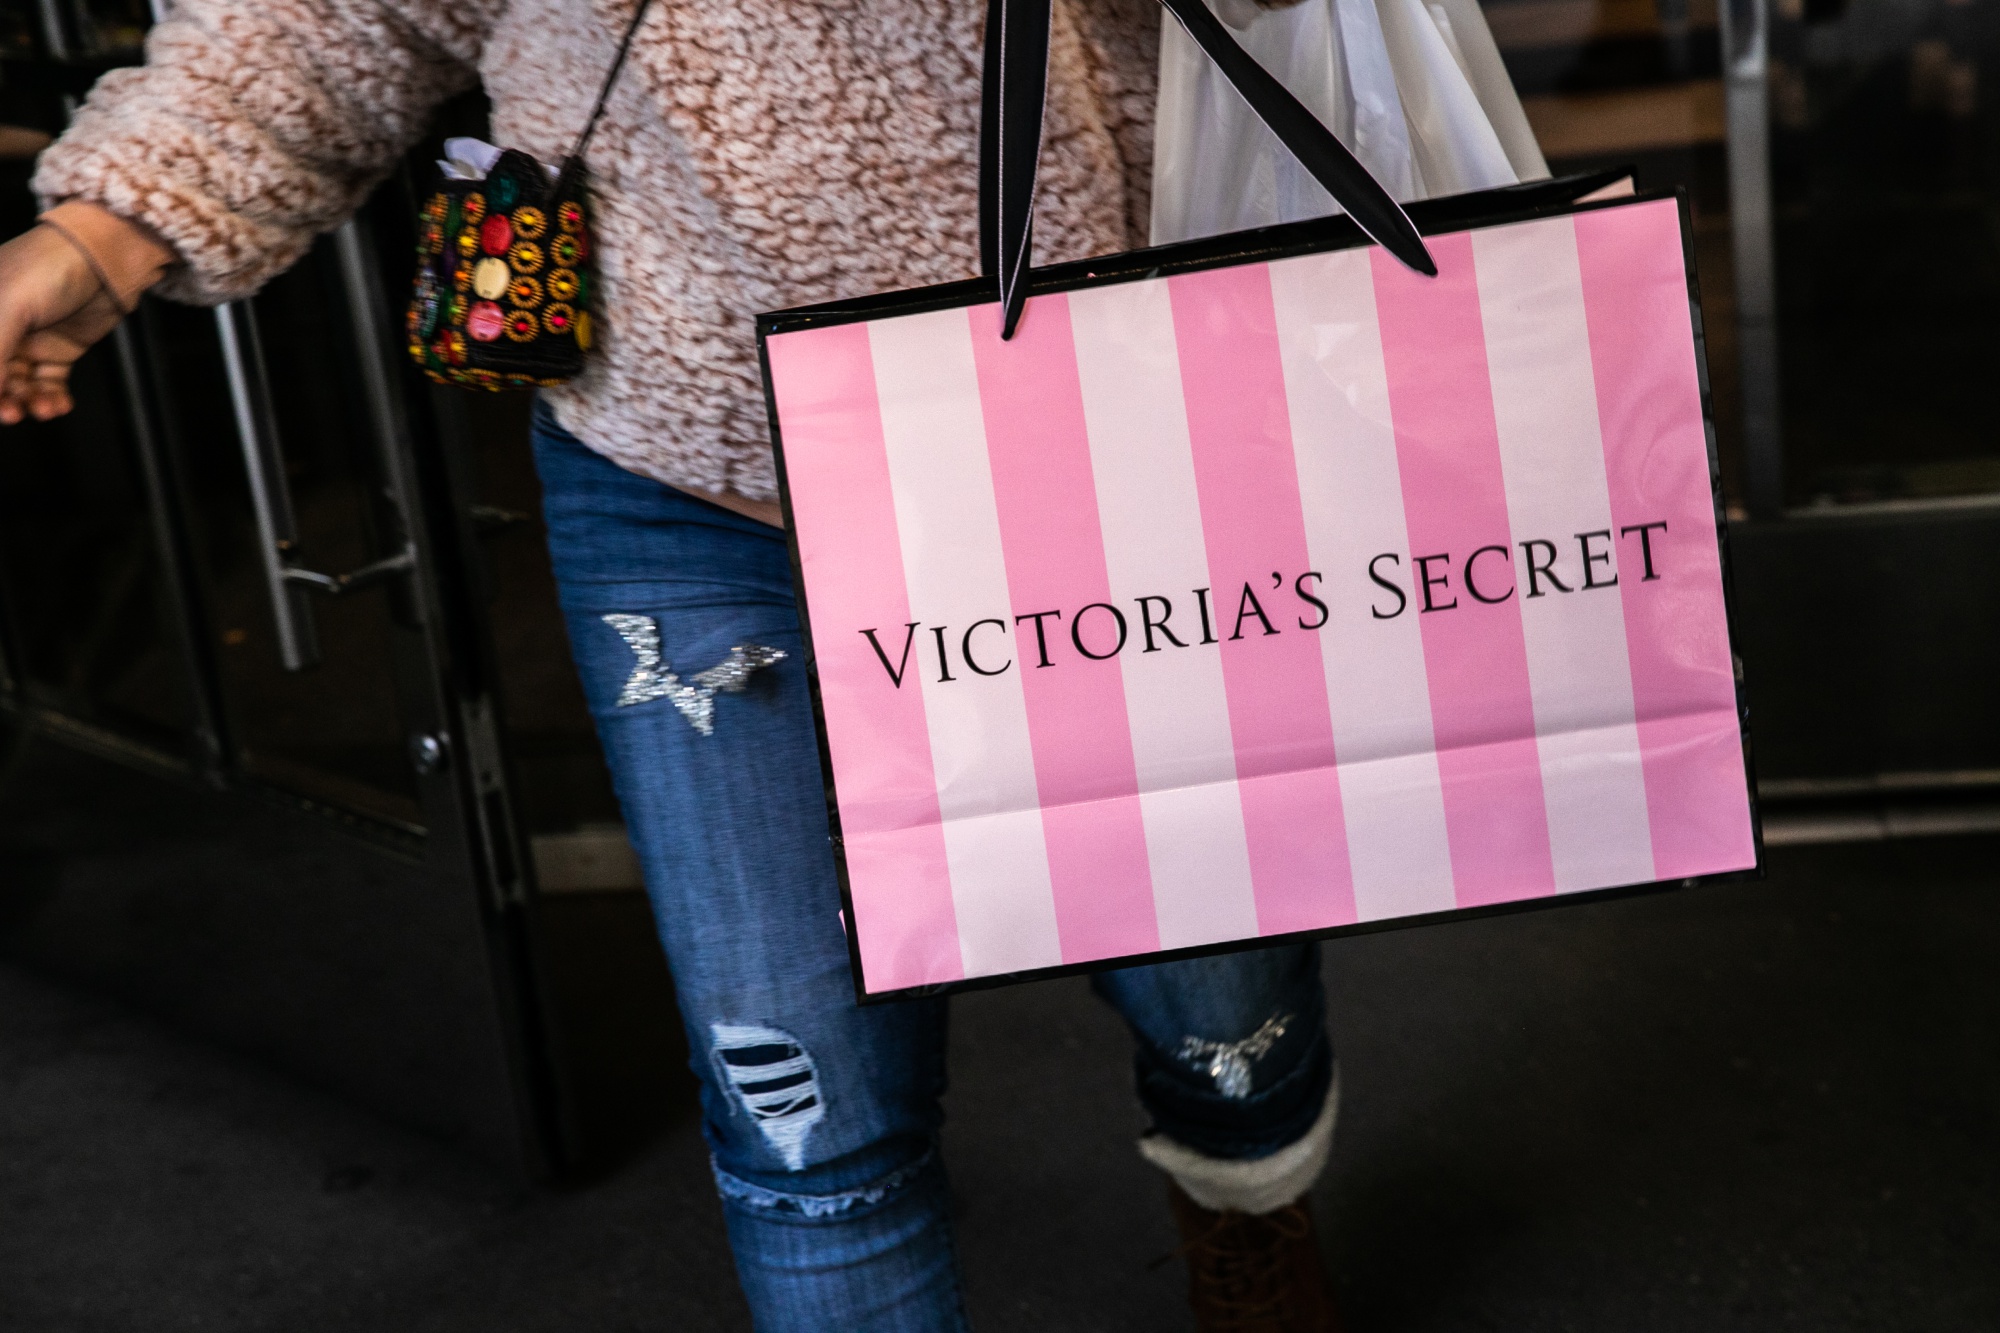 Victoria's Secret (VSCO) Signs 15% Pledge to Boost Black Suppliers,  Promotions - Bloomberg